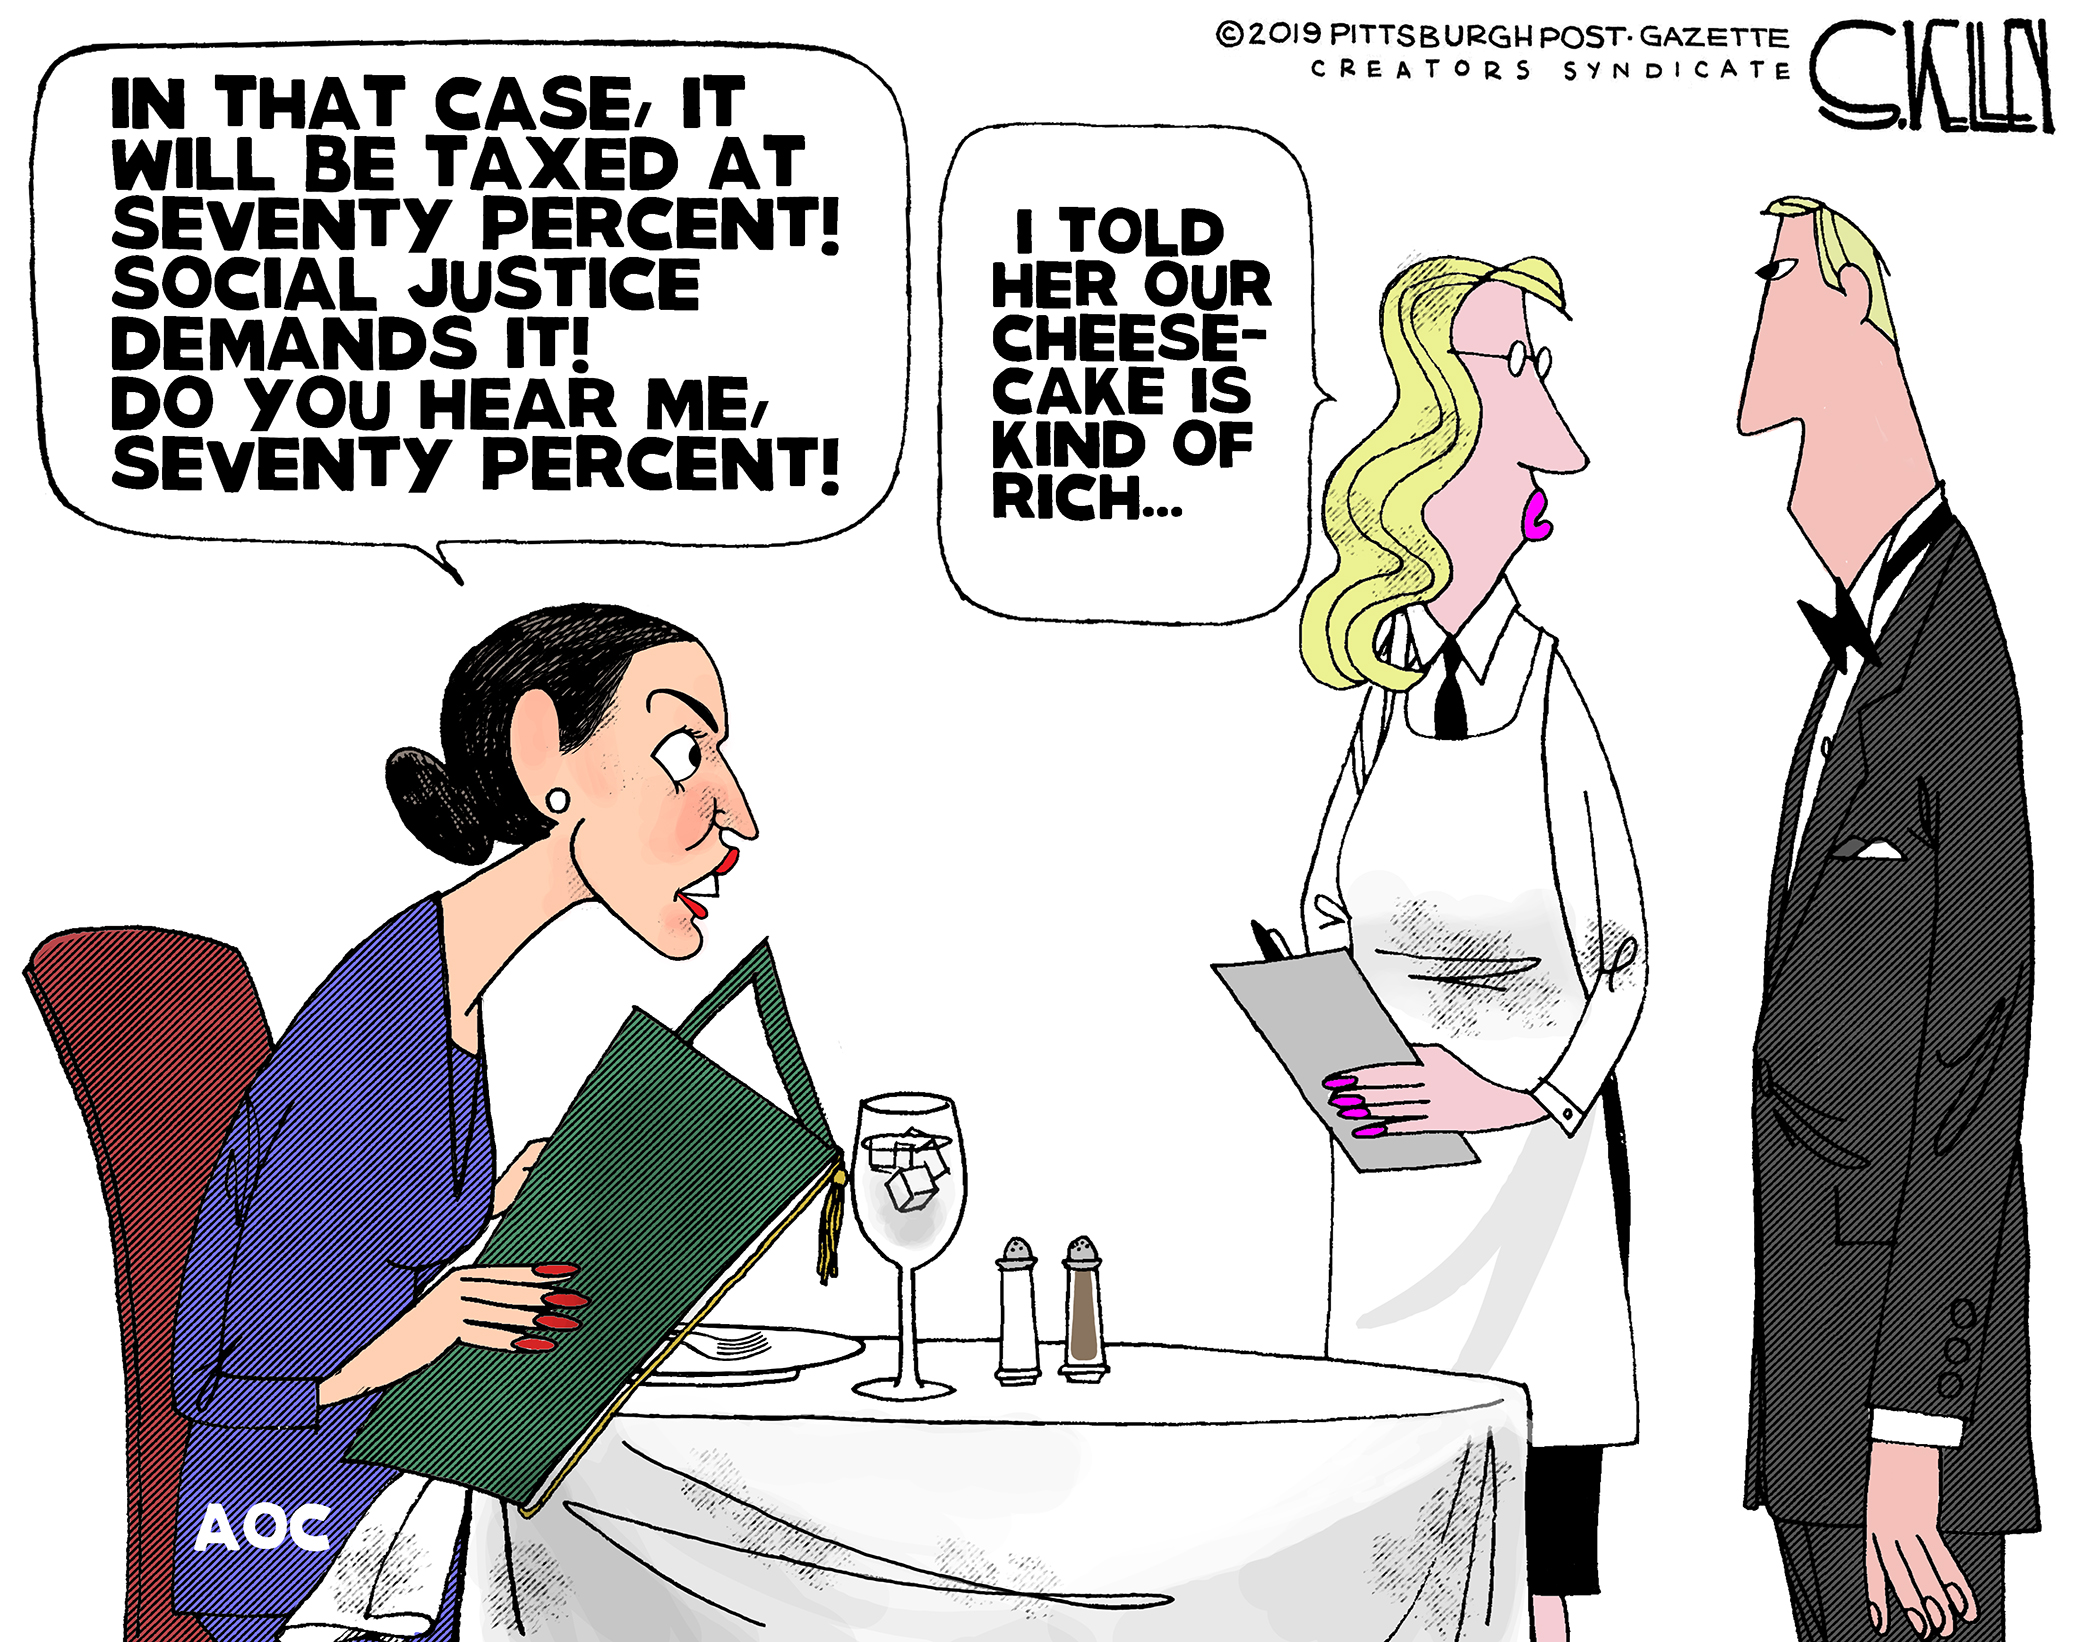 political cartoons feb 15 2019 - Como 2019 Pittsburgh PostGazette Creators Syndicate Cali In That Case, It Will Be Taxed At Seventy Percent! Social Justice Demands It! Do You Hear Me, Seventy Percent! I Told Her Our Cheese Cake Is Kind Of Rich... 900 Aoc